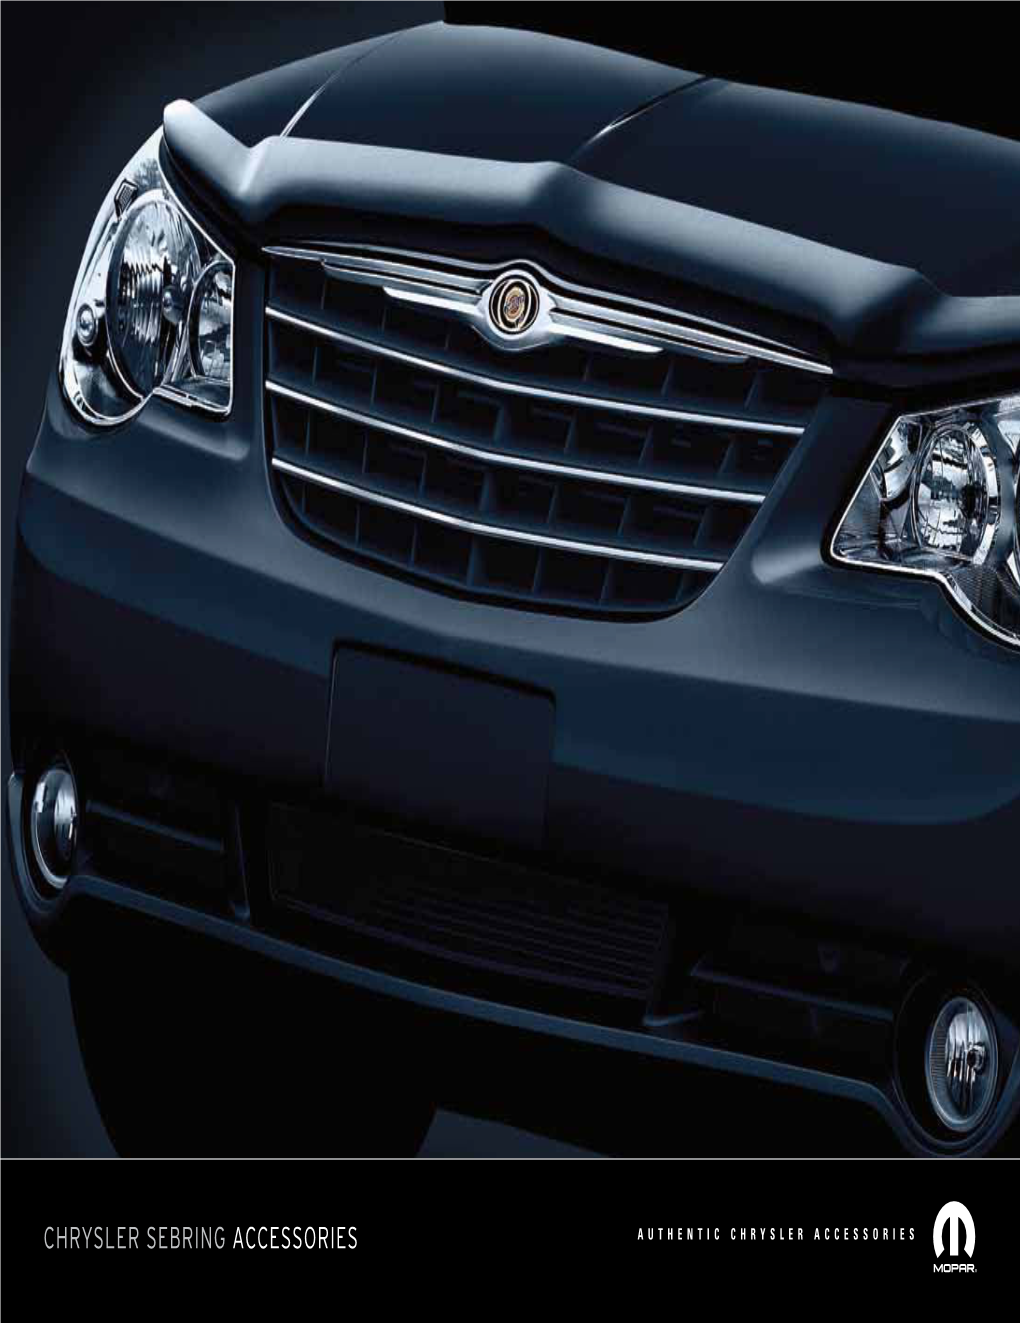 Chrysler Sebring Accessories Functionality Start with Authentic Accessories by Mopar